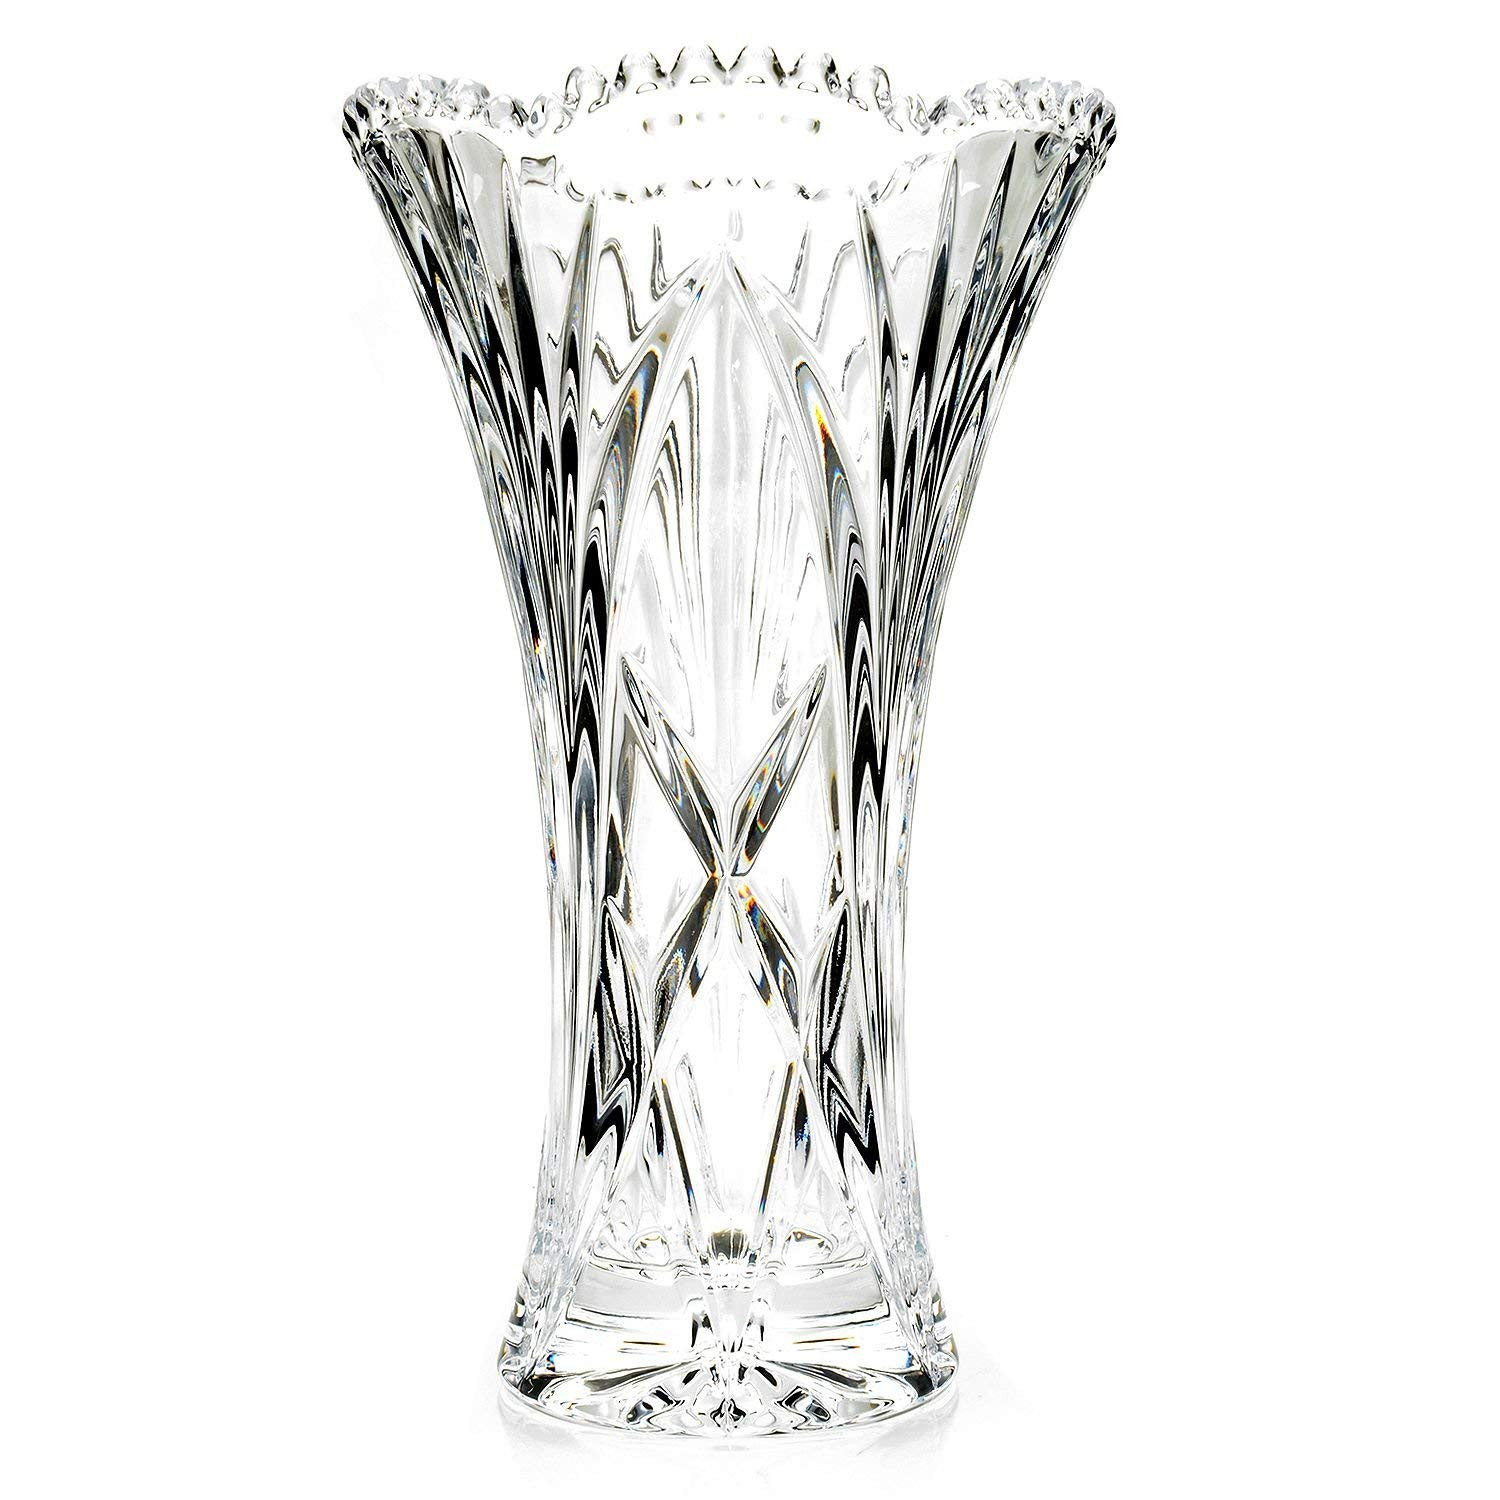 21 Ideal Mikasa Blossom Crystal Vase 2024 free download mikasa blossom crystal vase of amazon com marquis by waterford newberry vase 10 home kitchen in 71ubm01urhl sl1500